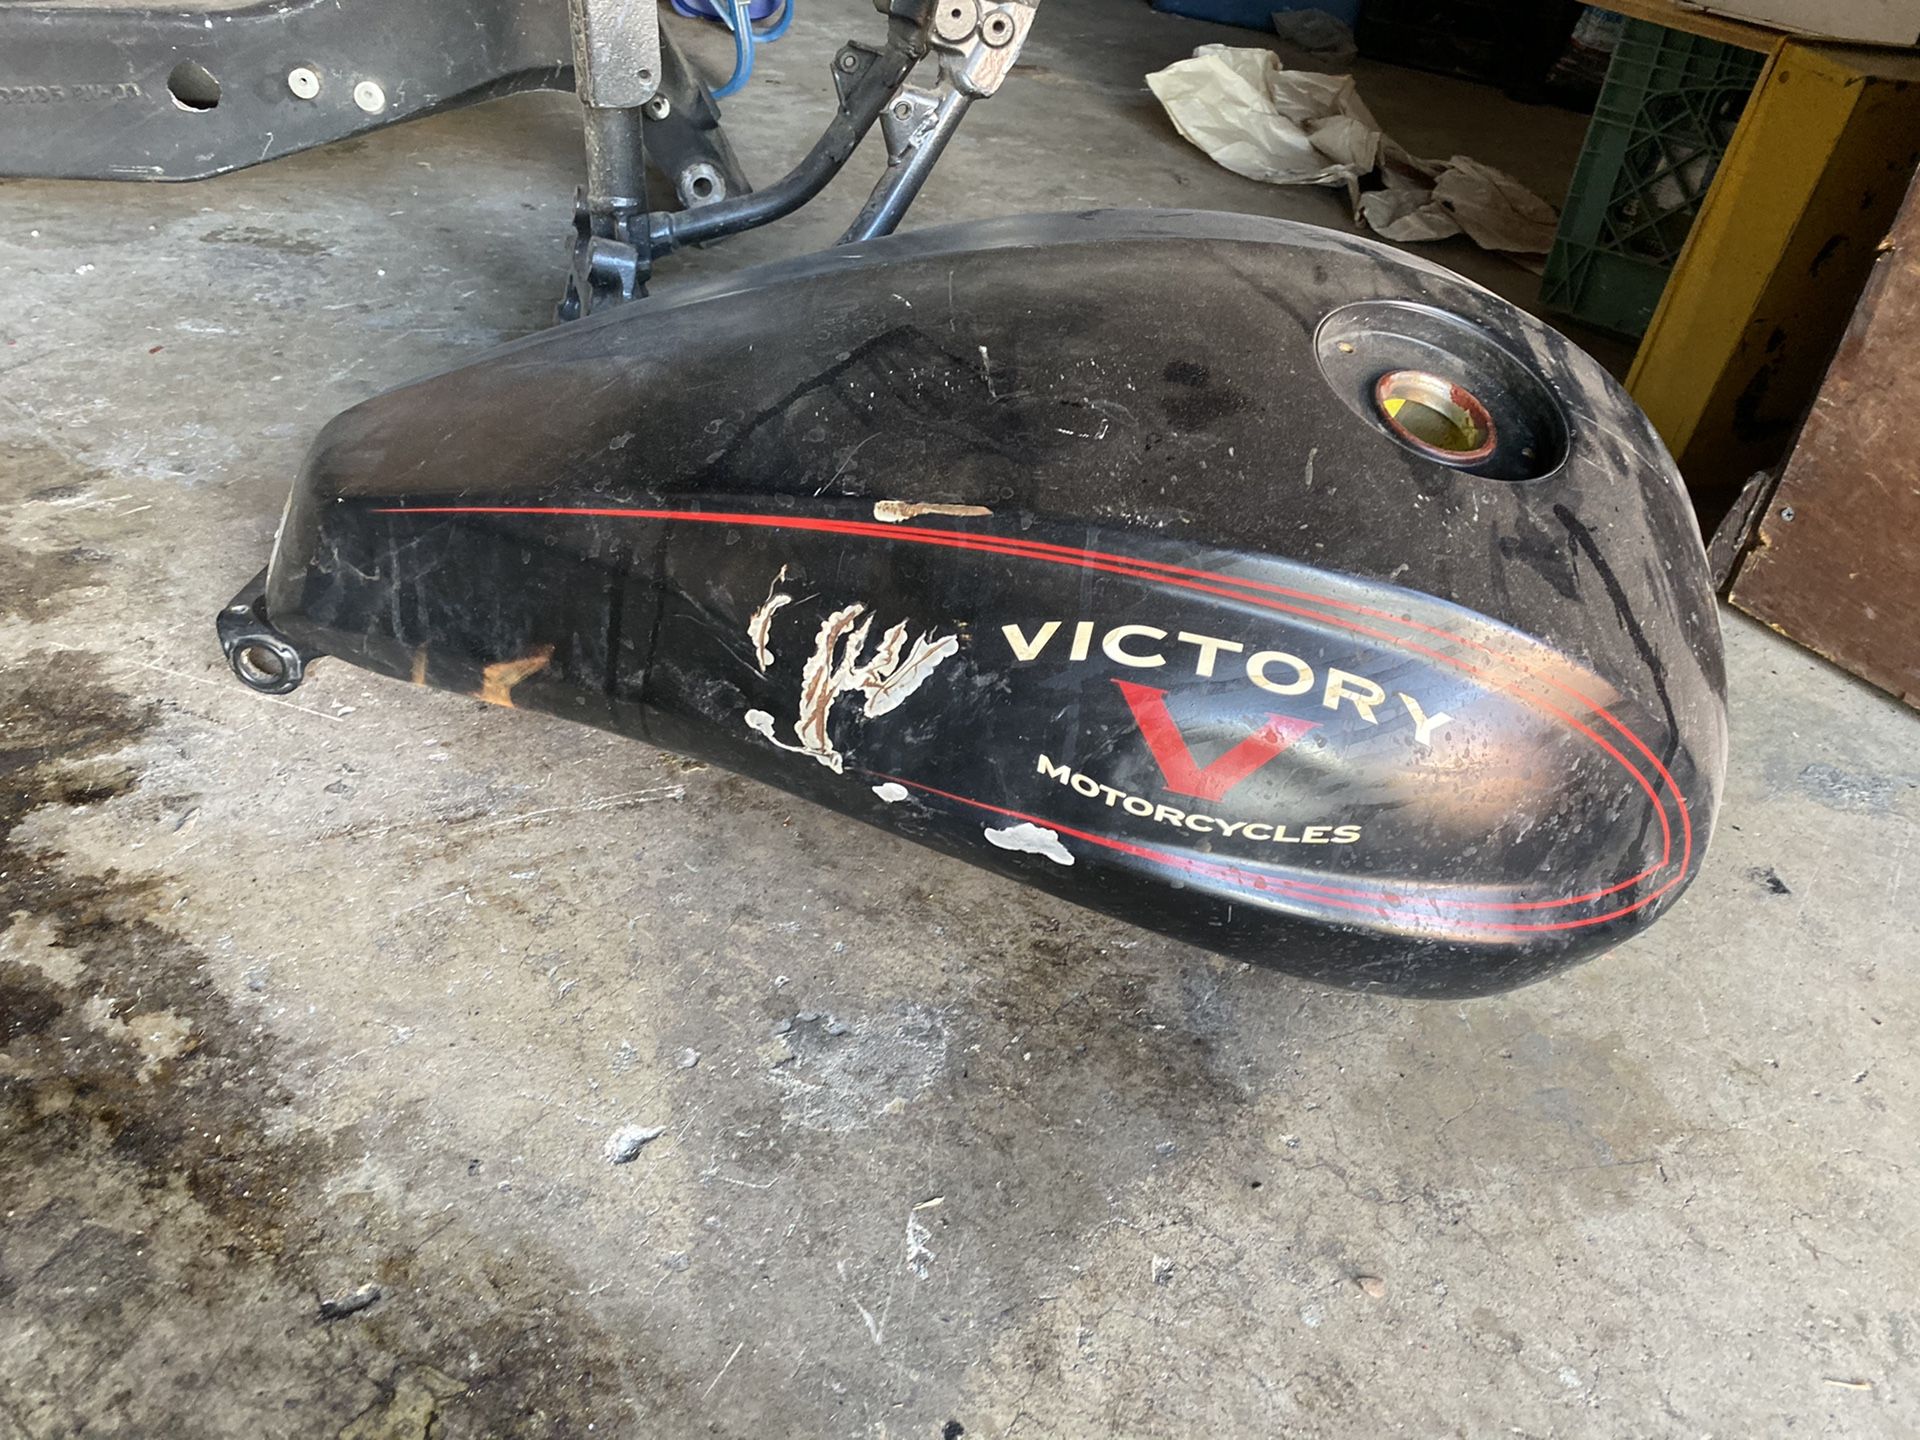 VICTORY MOTORCYCLE AND PARTS SWIMG ARM RIMS FORKS FRAMES TANKS